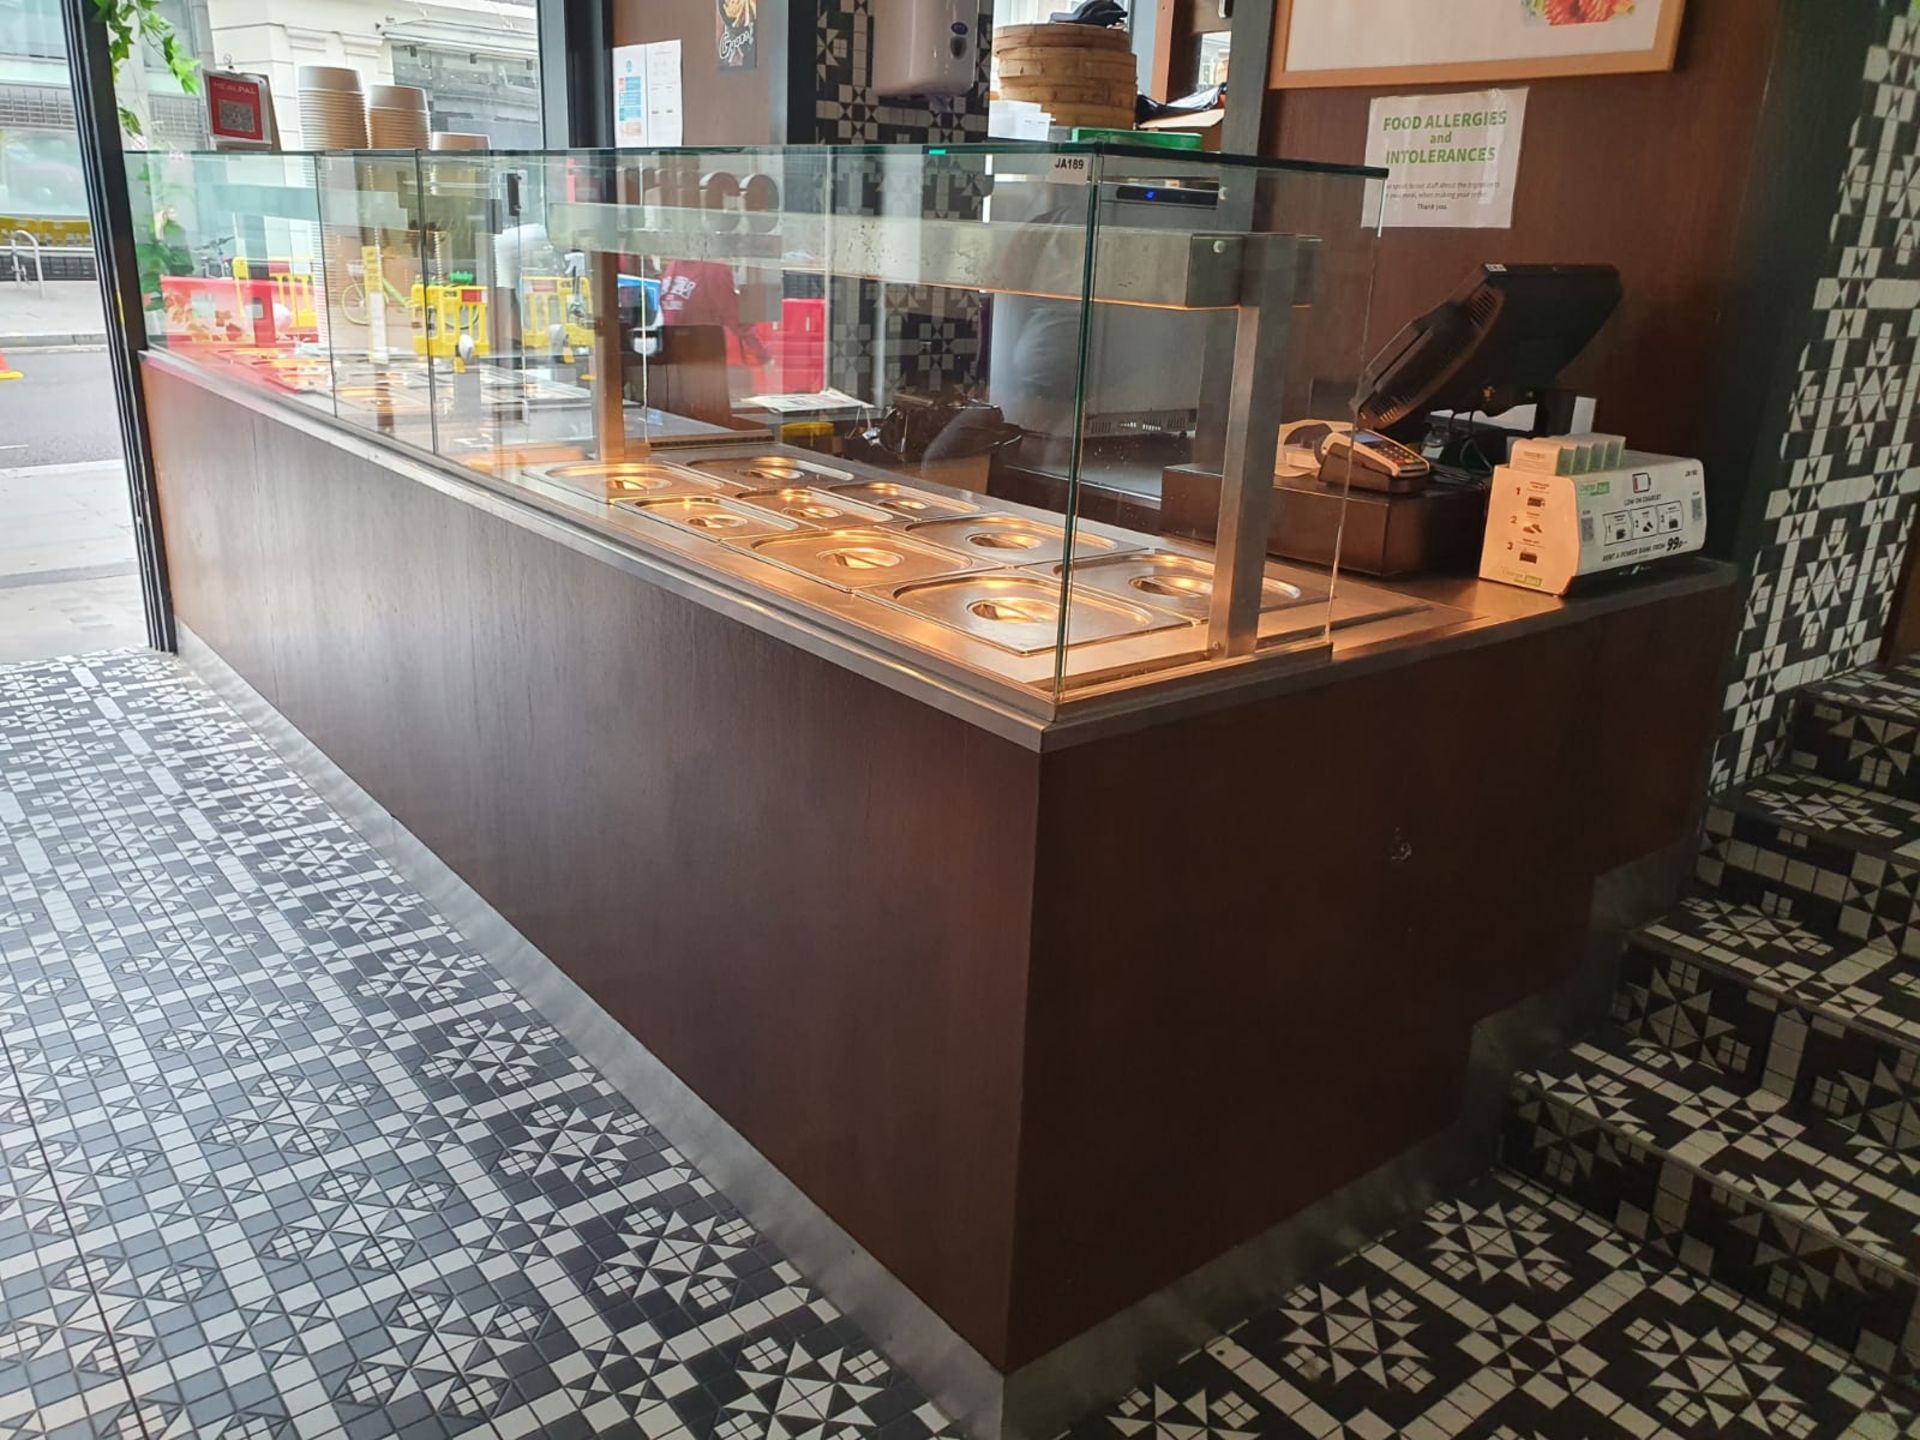 1 x Contemporary Restaurant Service Counter With Walnut Finish, Two Diamond Bain Marie Food - Image 11 of 25